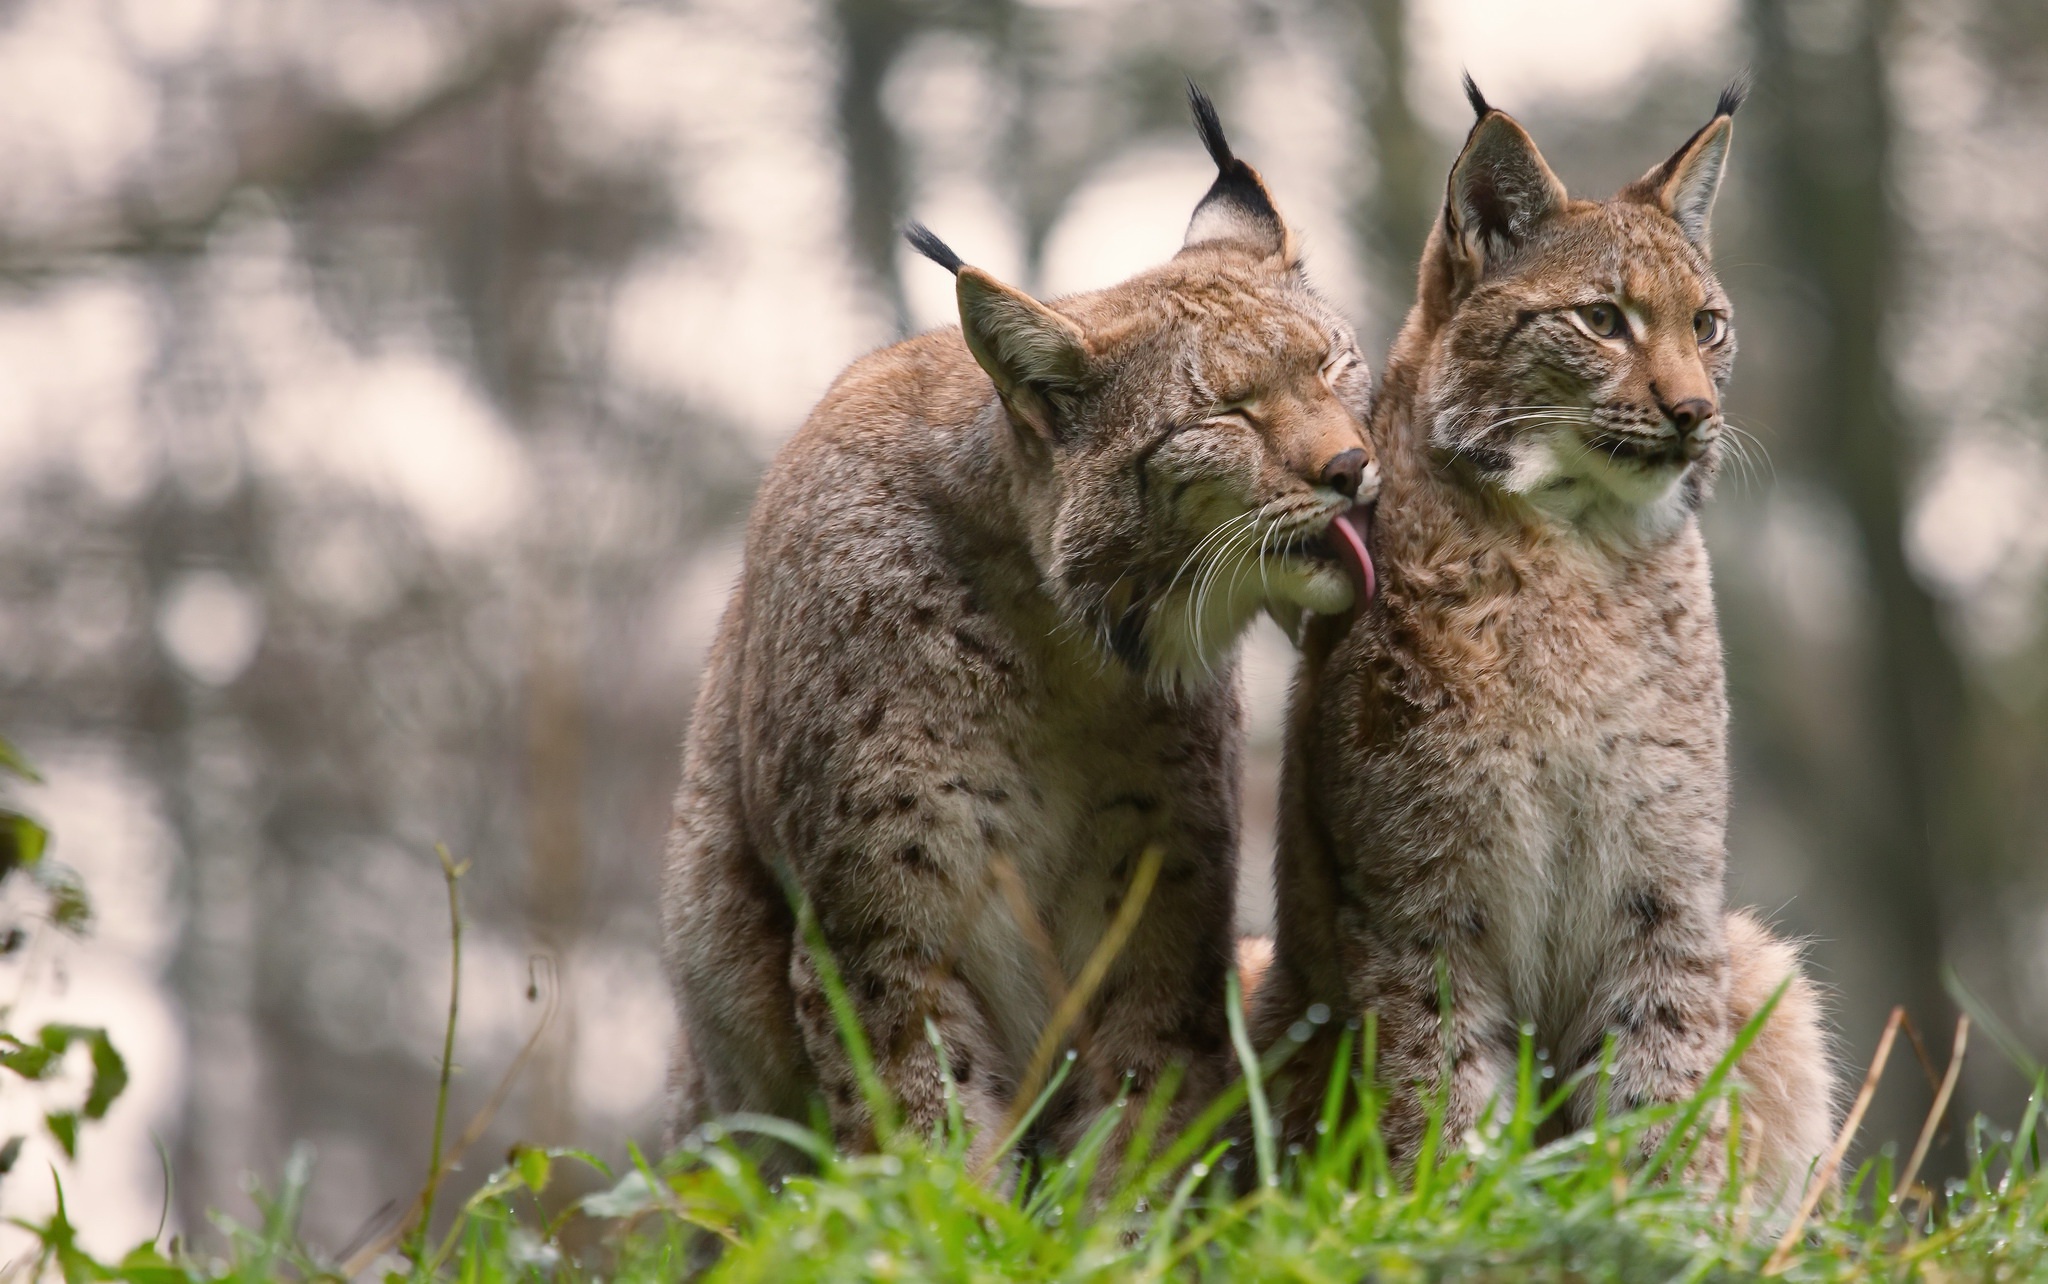 Caturday pic of lynx cats